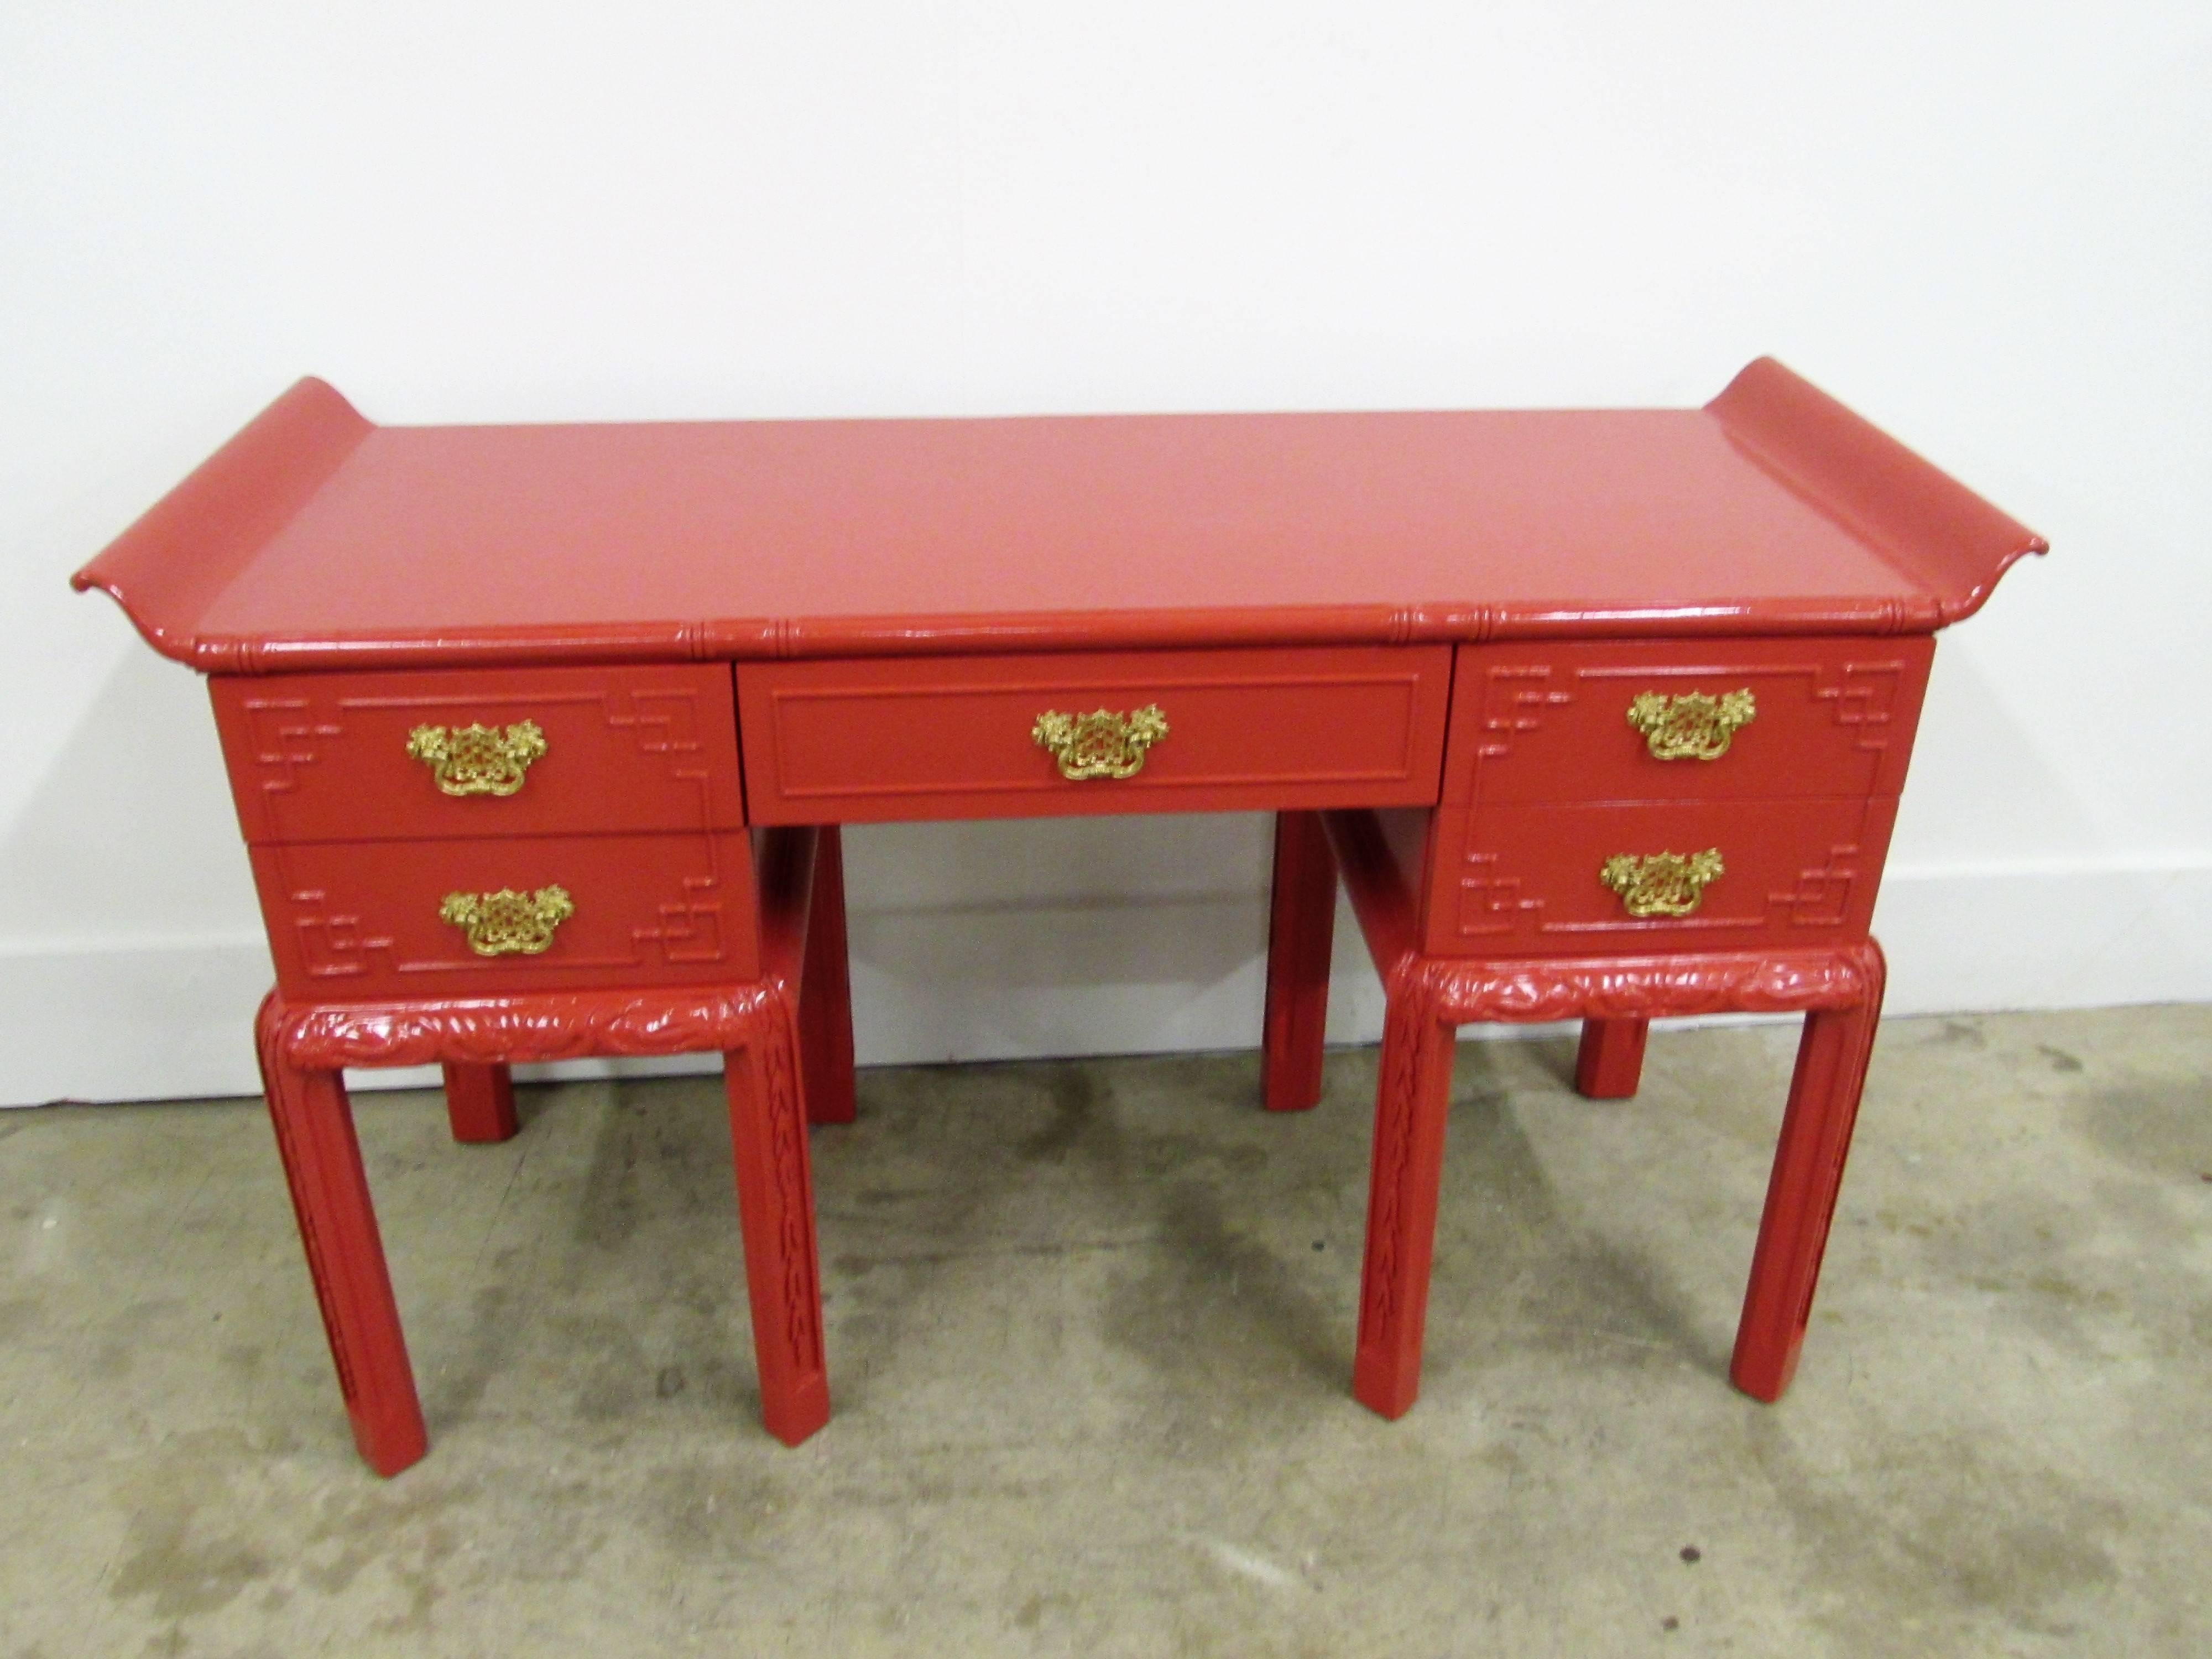 Red lacquered mahogany chinoiserie pagoda desk or console table with five drawers and fretwork design on drawers with amazing pagoda brass hardware, sitting below eight intricately carved legs. Floor to bottom of middle drawer; 23